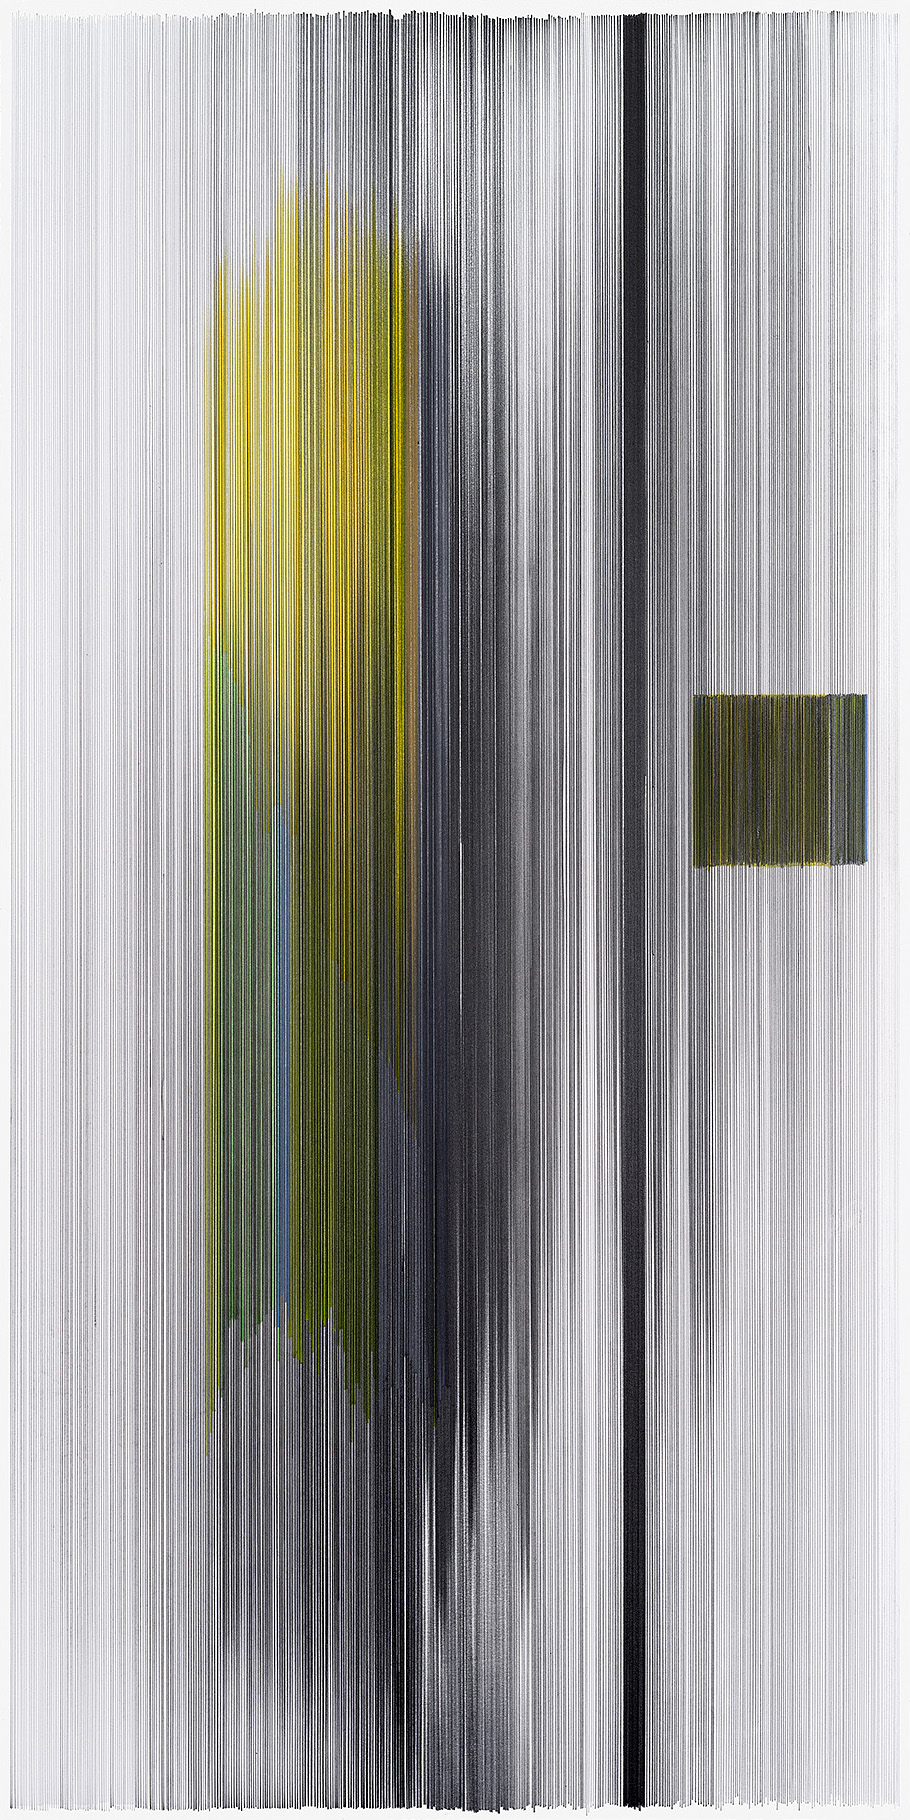    notations 08   2014 graphite and colored pencil on mat board 20 x 40 inches 